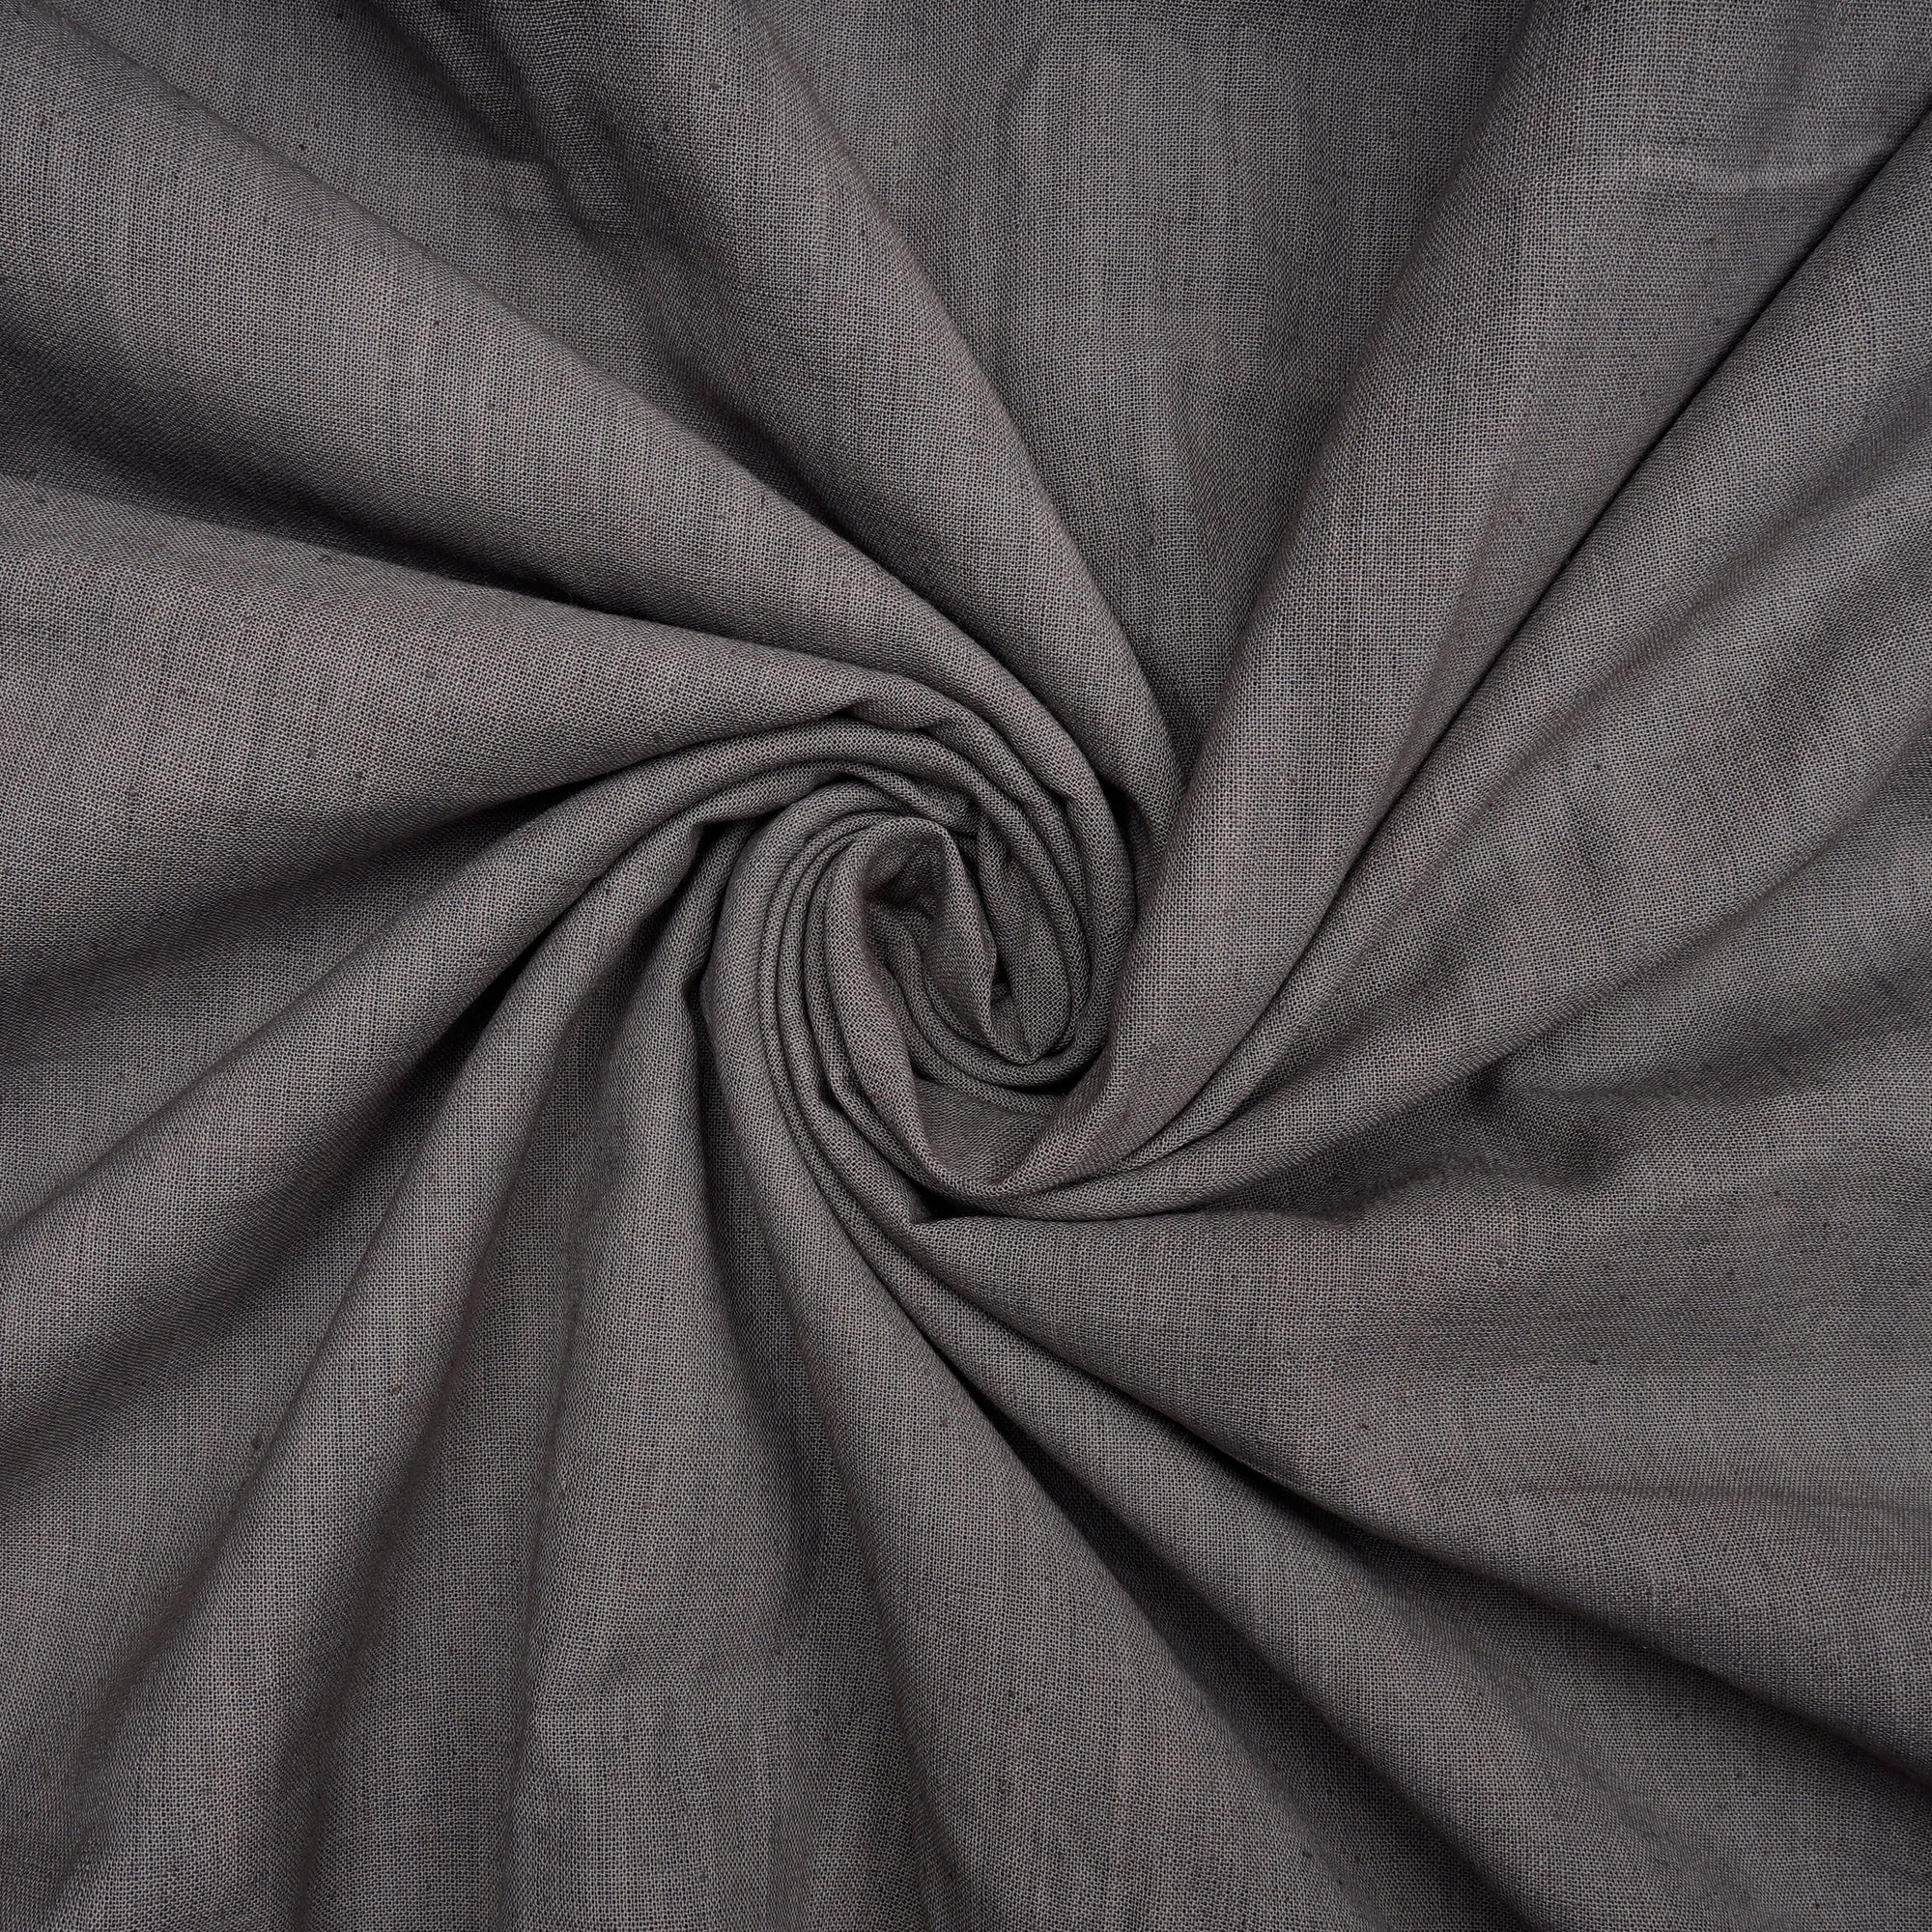 Ultimate Gray 40's Count Piece Dyed Handspun Handwoven Cotton Fabric